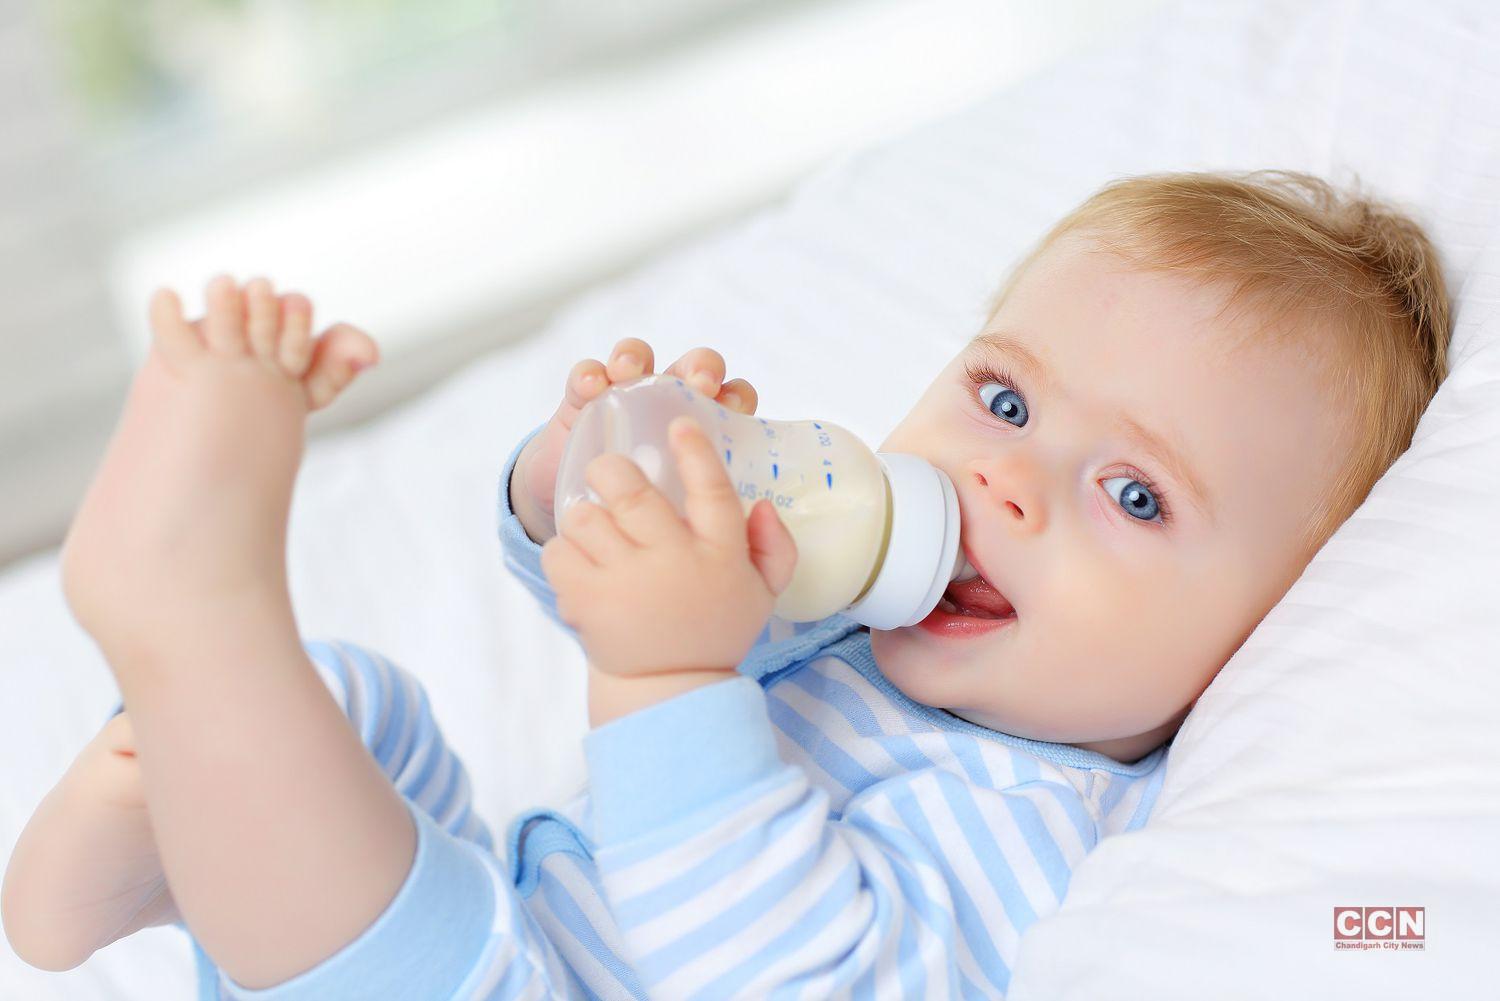 What Does Milk Do for Babies?